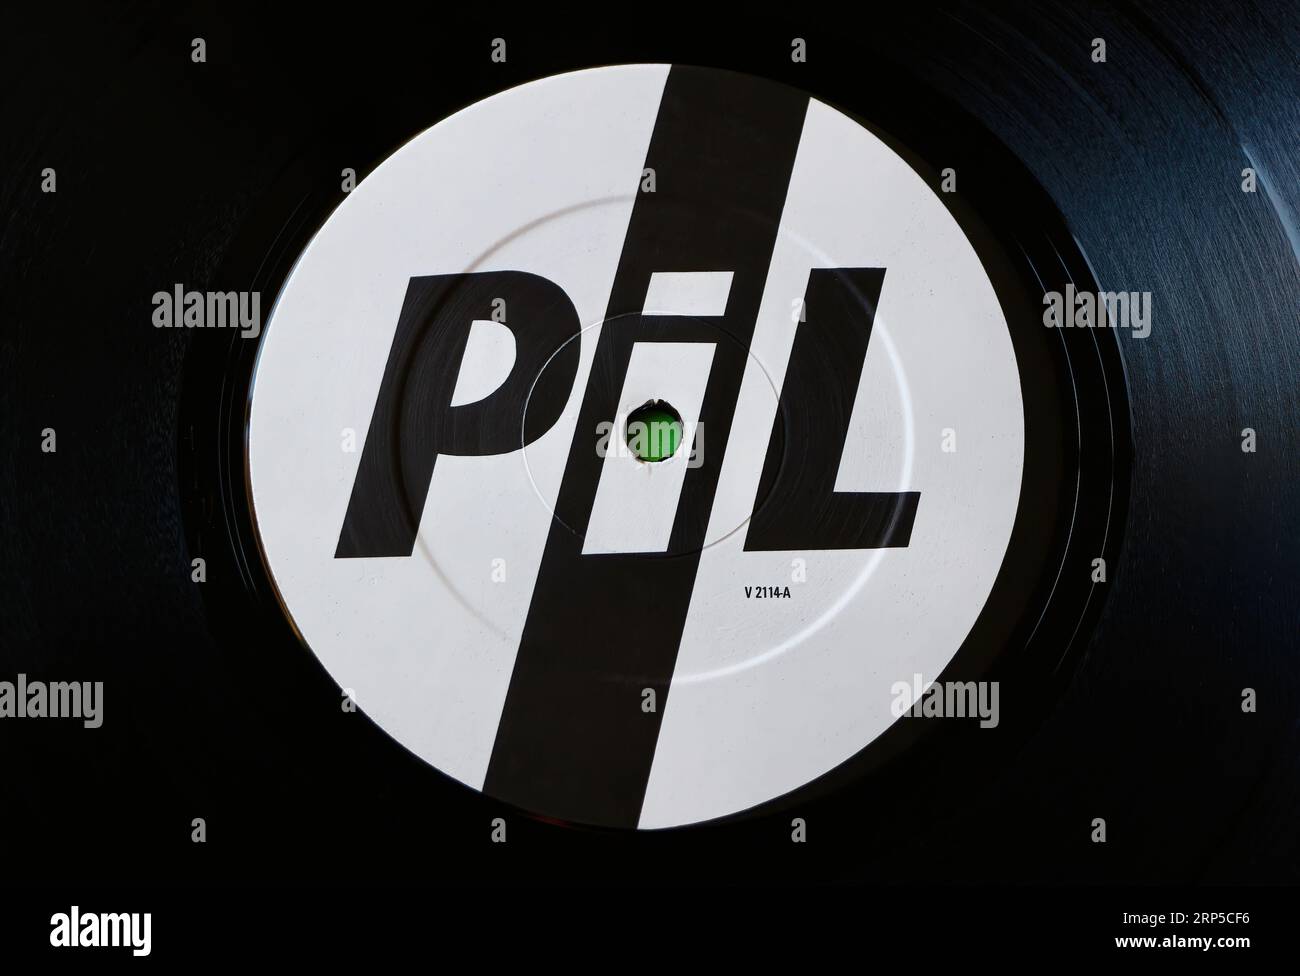 Photo close up of a centre label on an original 1984 pressing of a long playing vinyl disc Commercial Zone By Public Image Limited PiL Stock Photo